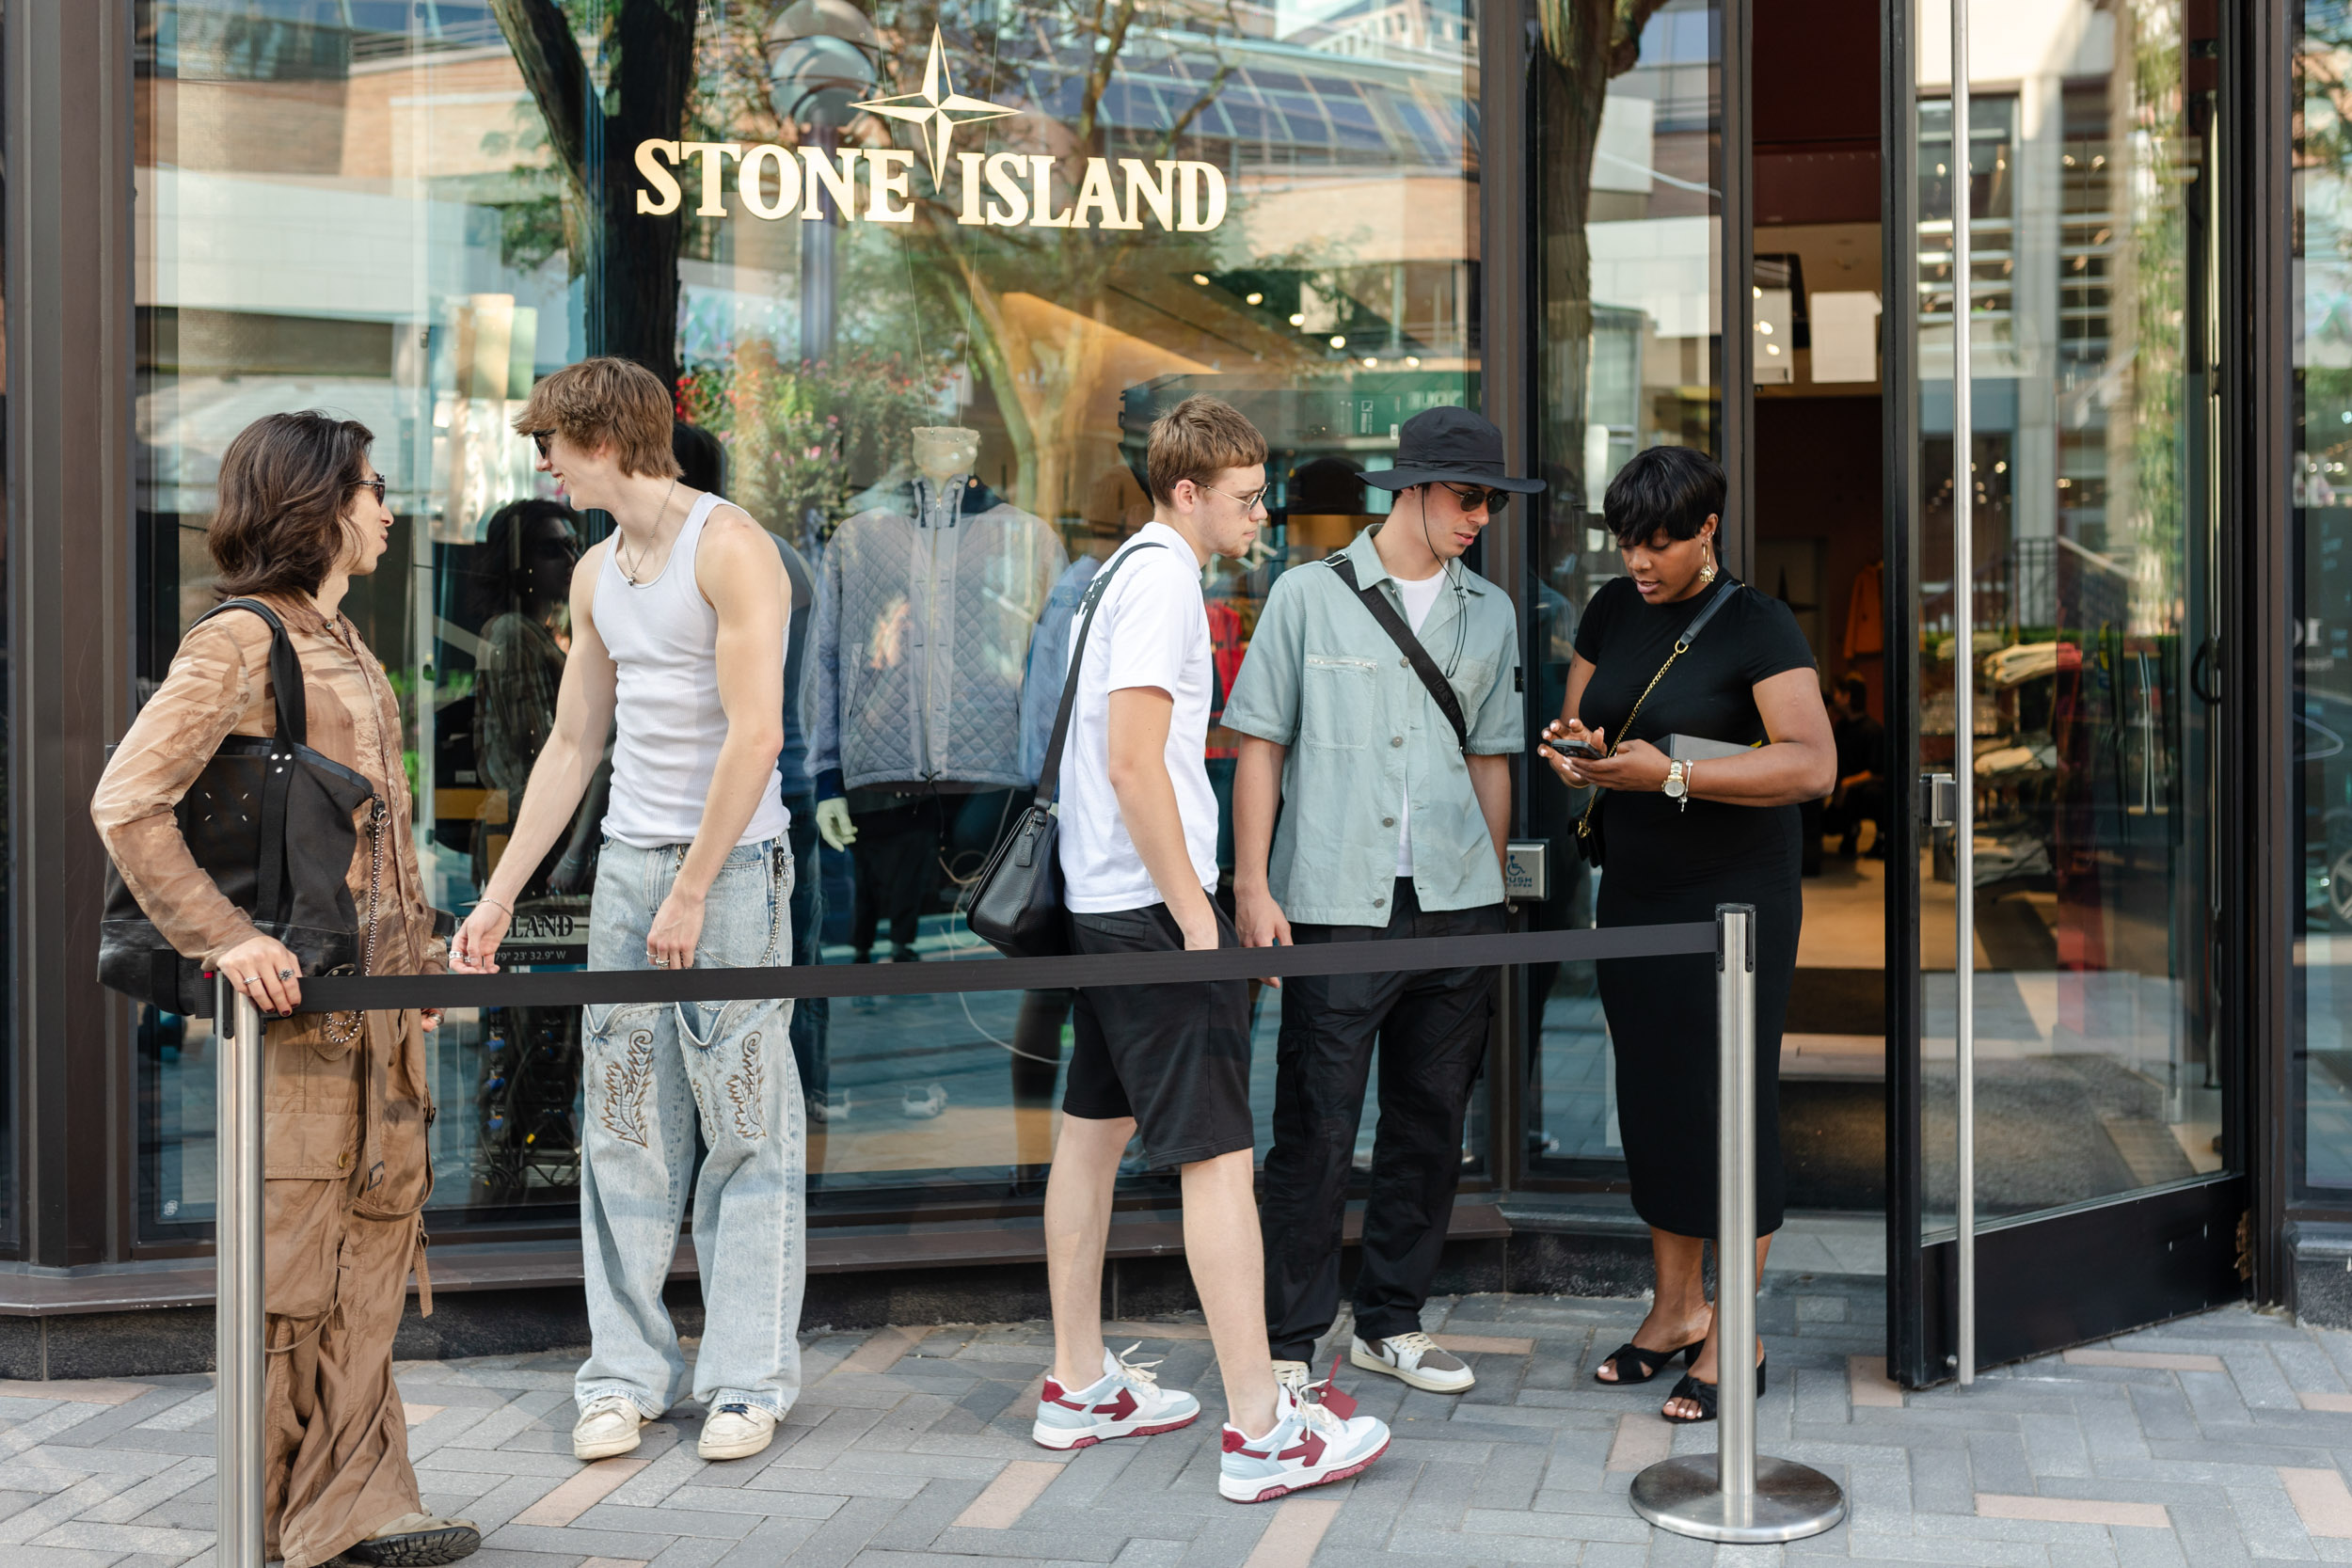 A group of people standing in front of the Stone Island store.